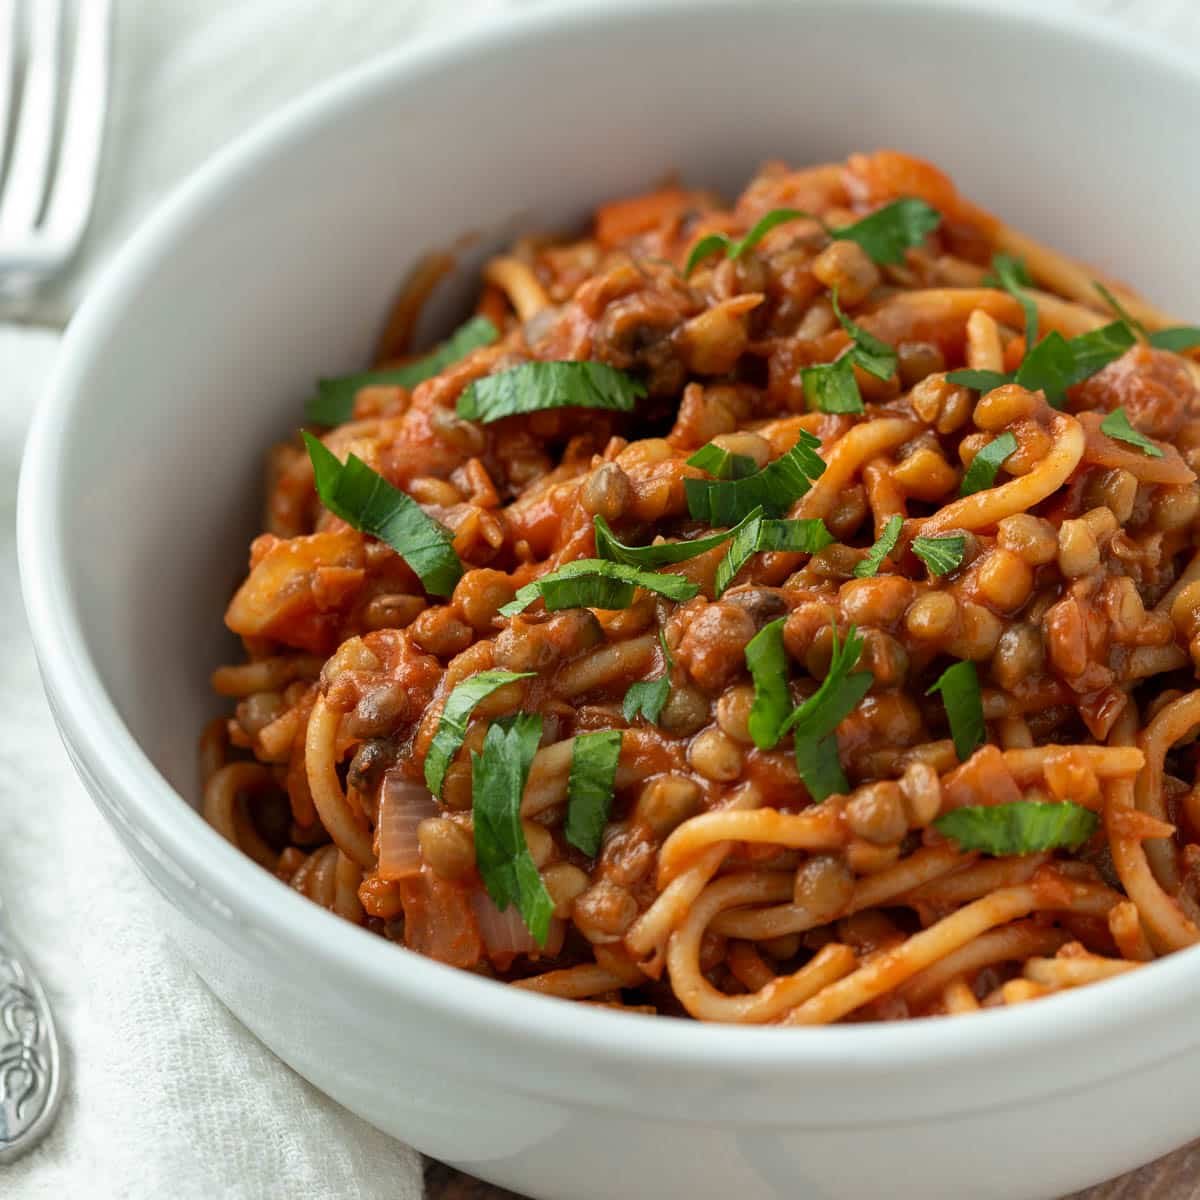 Vegan bolognese served with spaghetti and topped with chopped parsley.